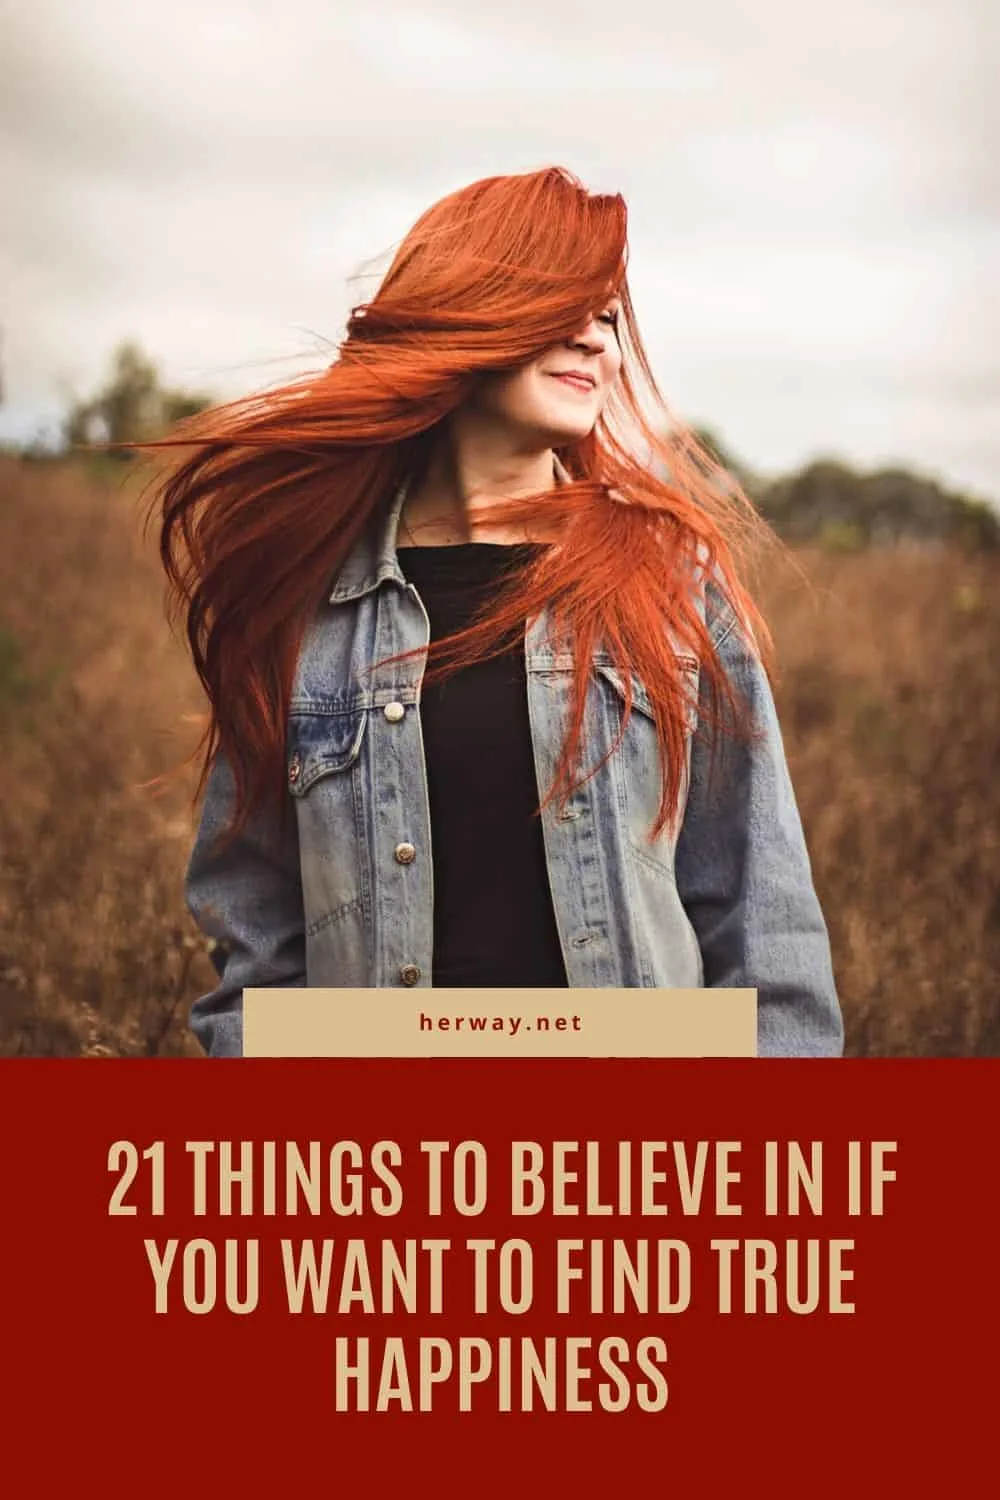 21 Things To Believe In If You Want To Find True Happiness